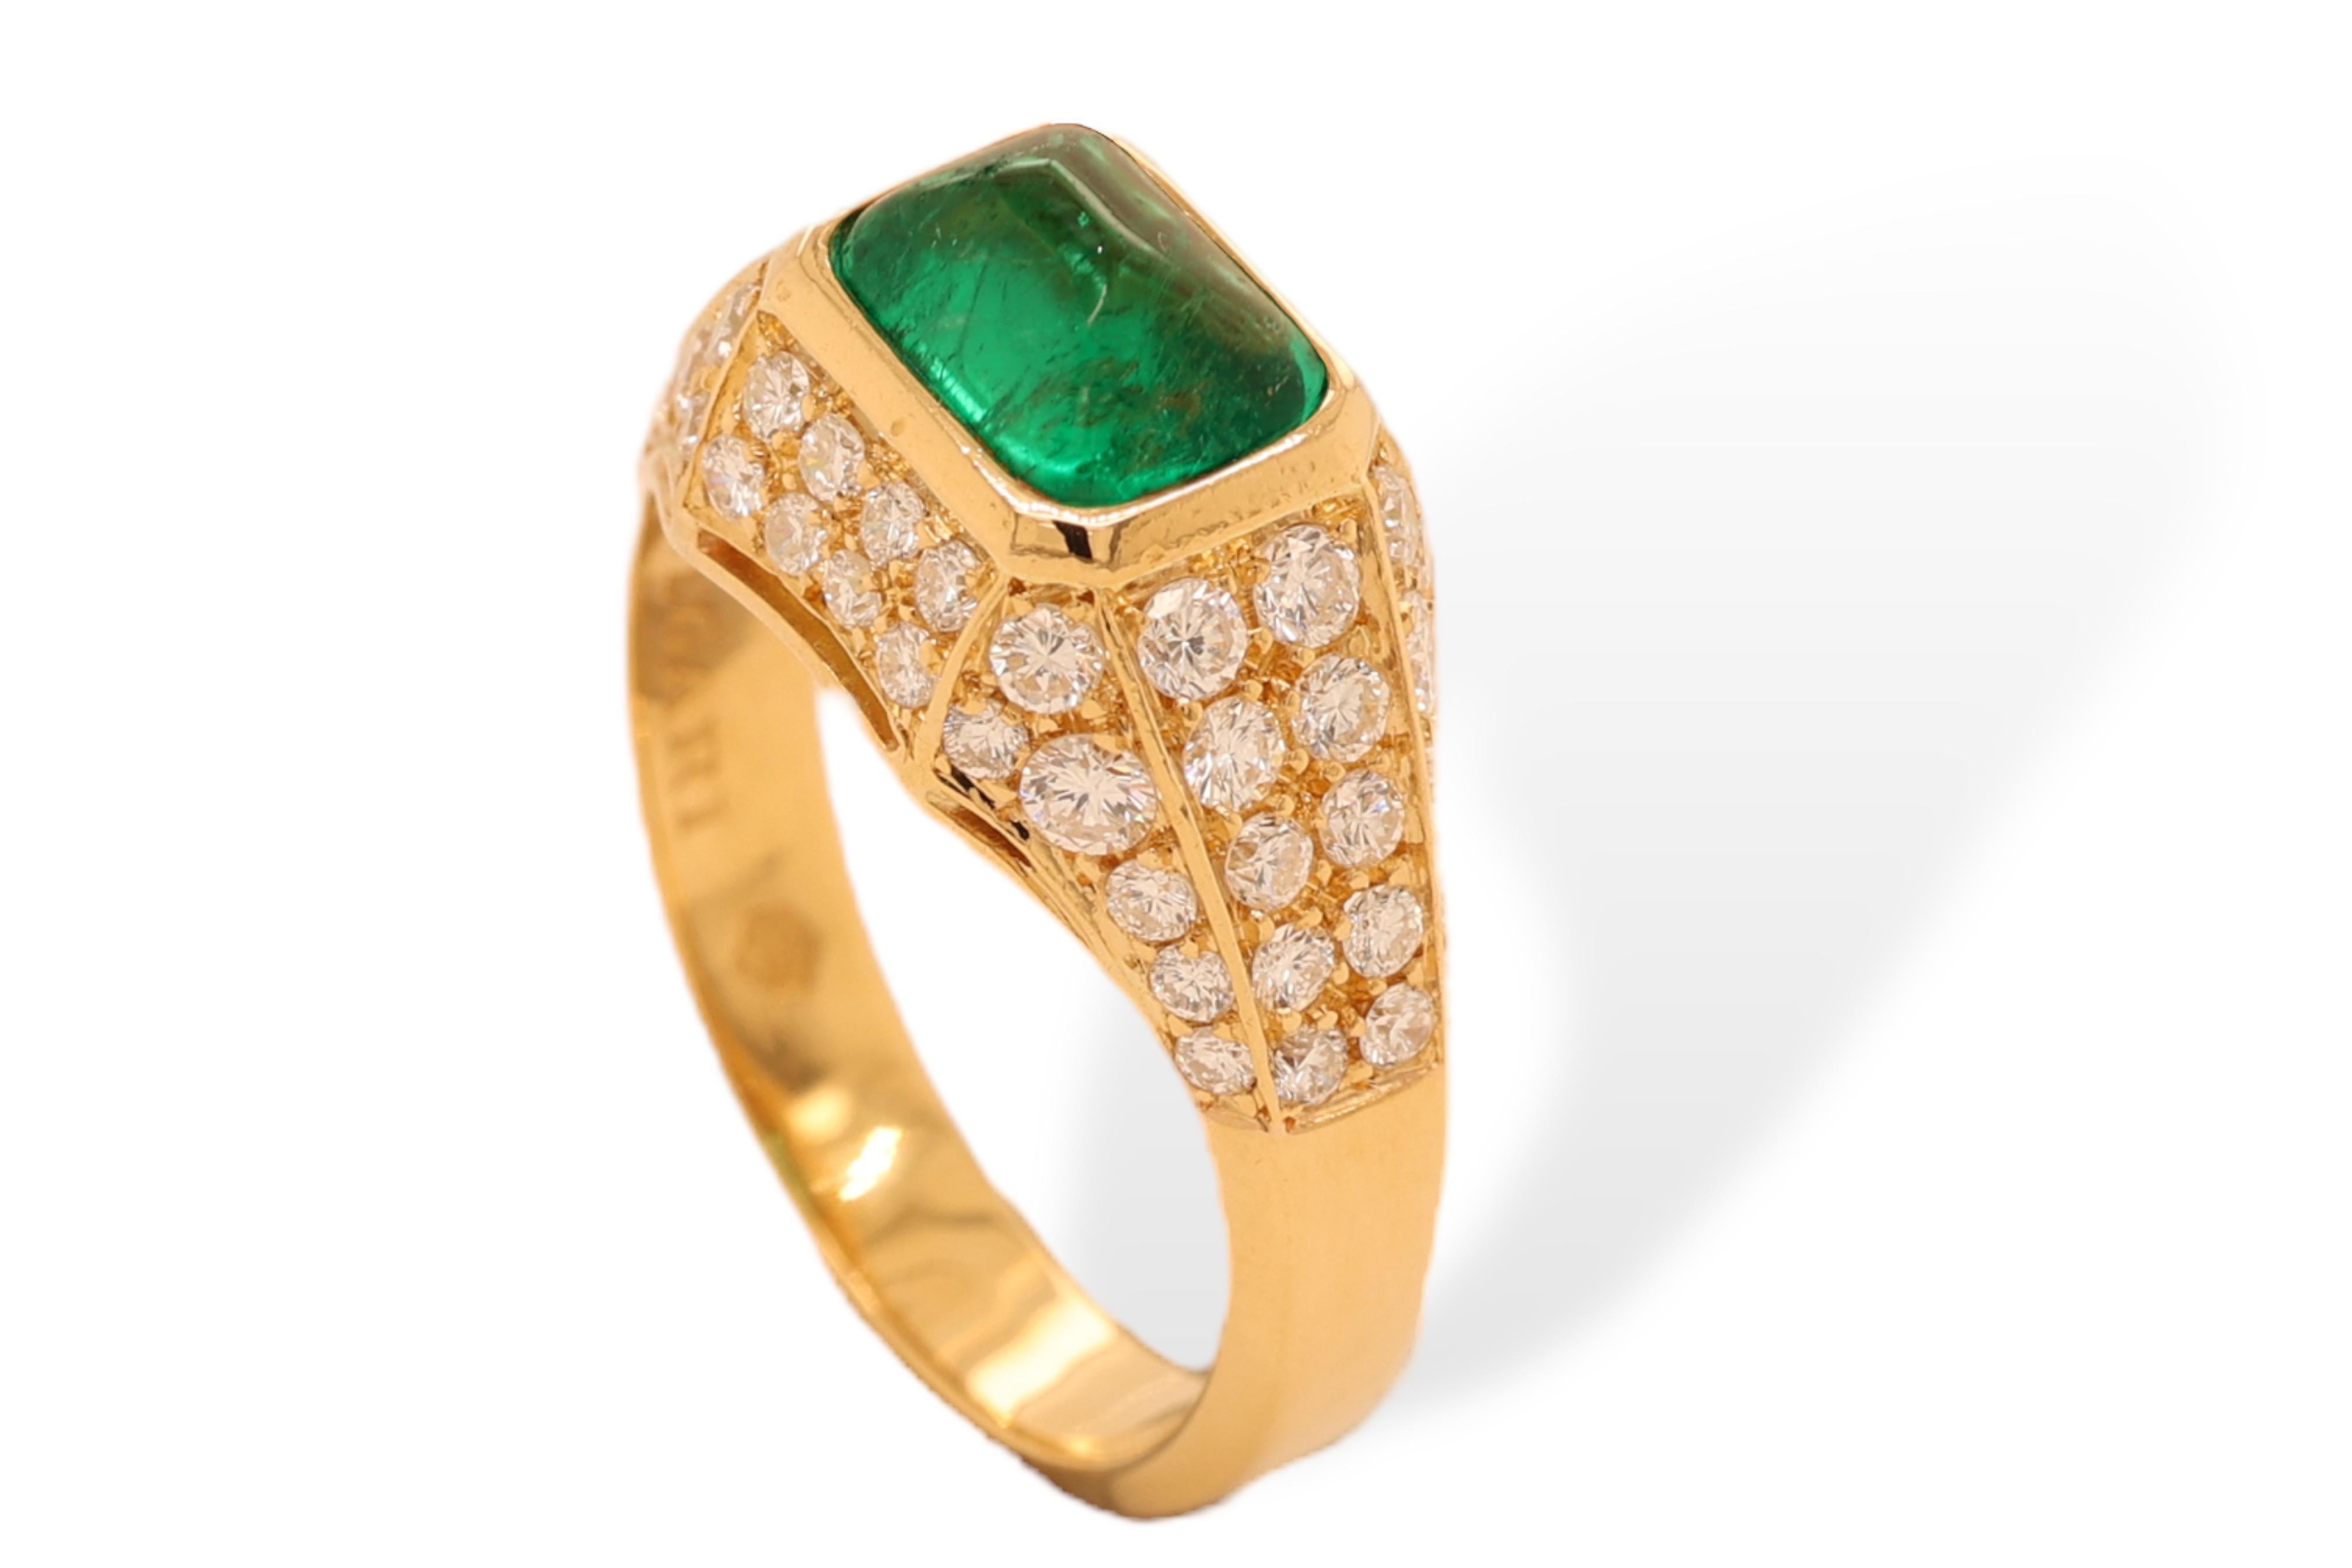 Gorgeous Bvlgari Ring with 0.93ct Sugarloaf Cabochon Emerald and Diamonds, Estate His Majesty The SUltan Of Oman Qaboos Bin Said

Emerald: Sugarloaf cabochon 0.93ct 

Diamonds: 48 brilliant cut diamonds, together approx. 1.05ct

Material: 18kt